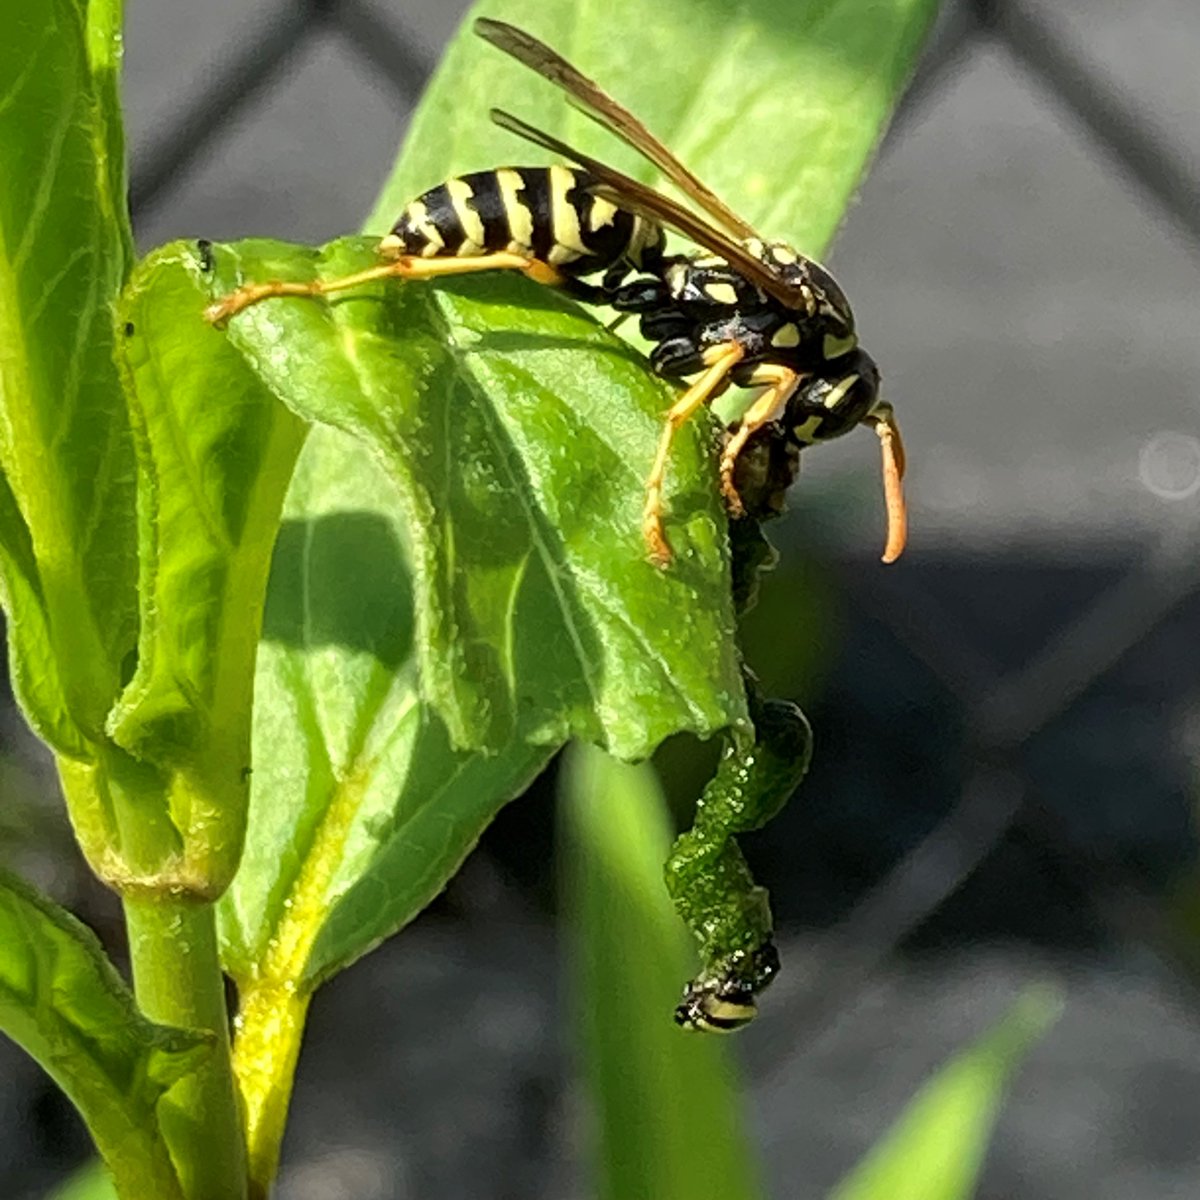 Unhappy #MonarchMonday 🦋
#InvasiveAlert
Alien European Paper Wasp caught in the act, depredating Monarch caterpillar😢
Introduced to North America, these wasps are now abundant in urban settings. Are urban gardens ecological traps for Monarch butterflies?
#EndangeredSpecies